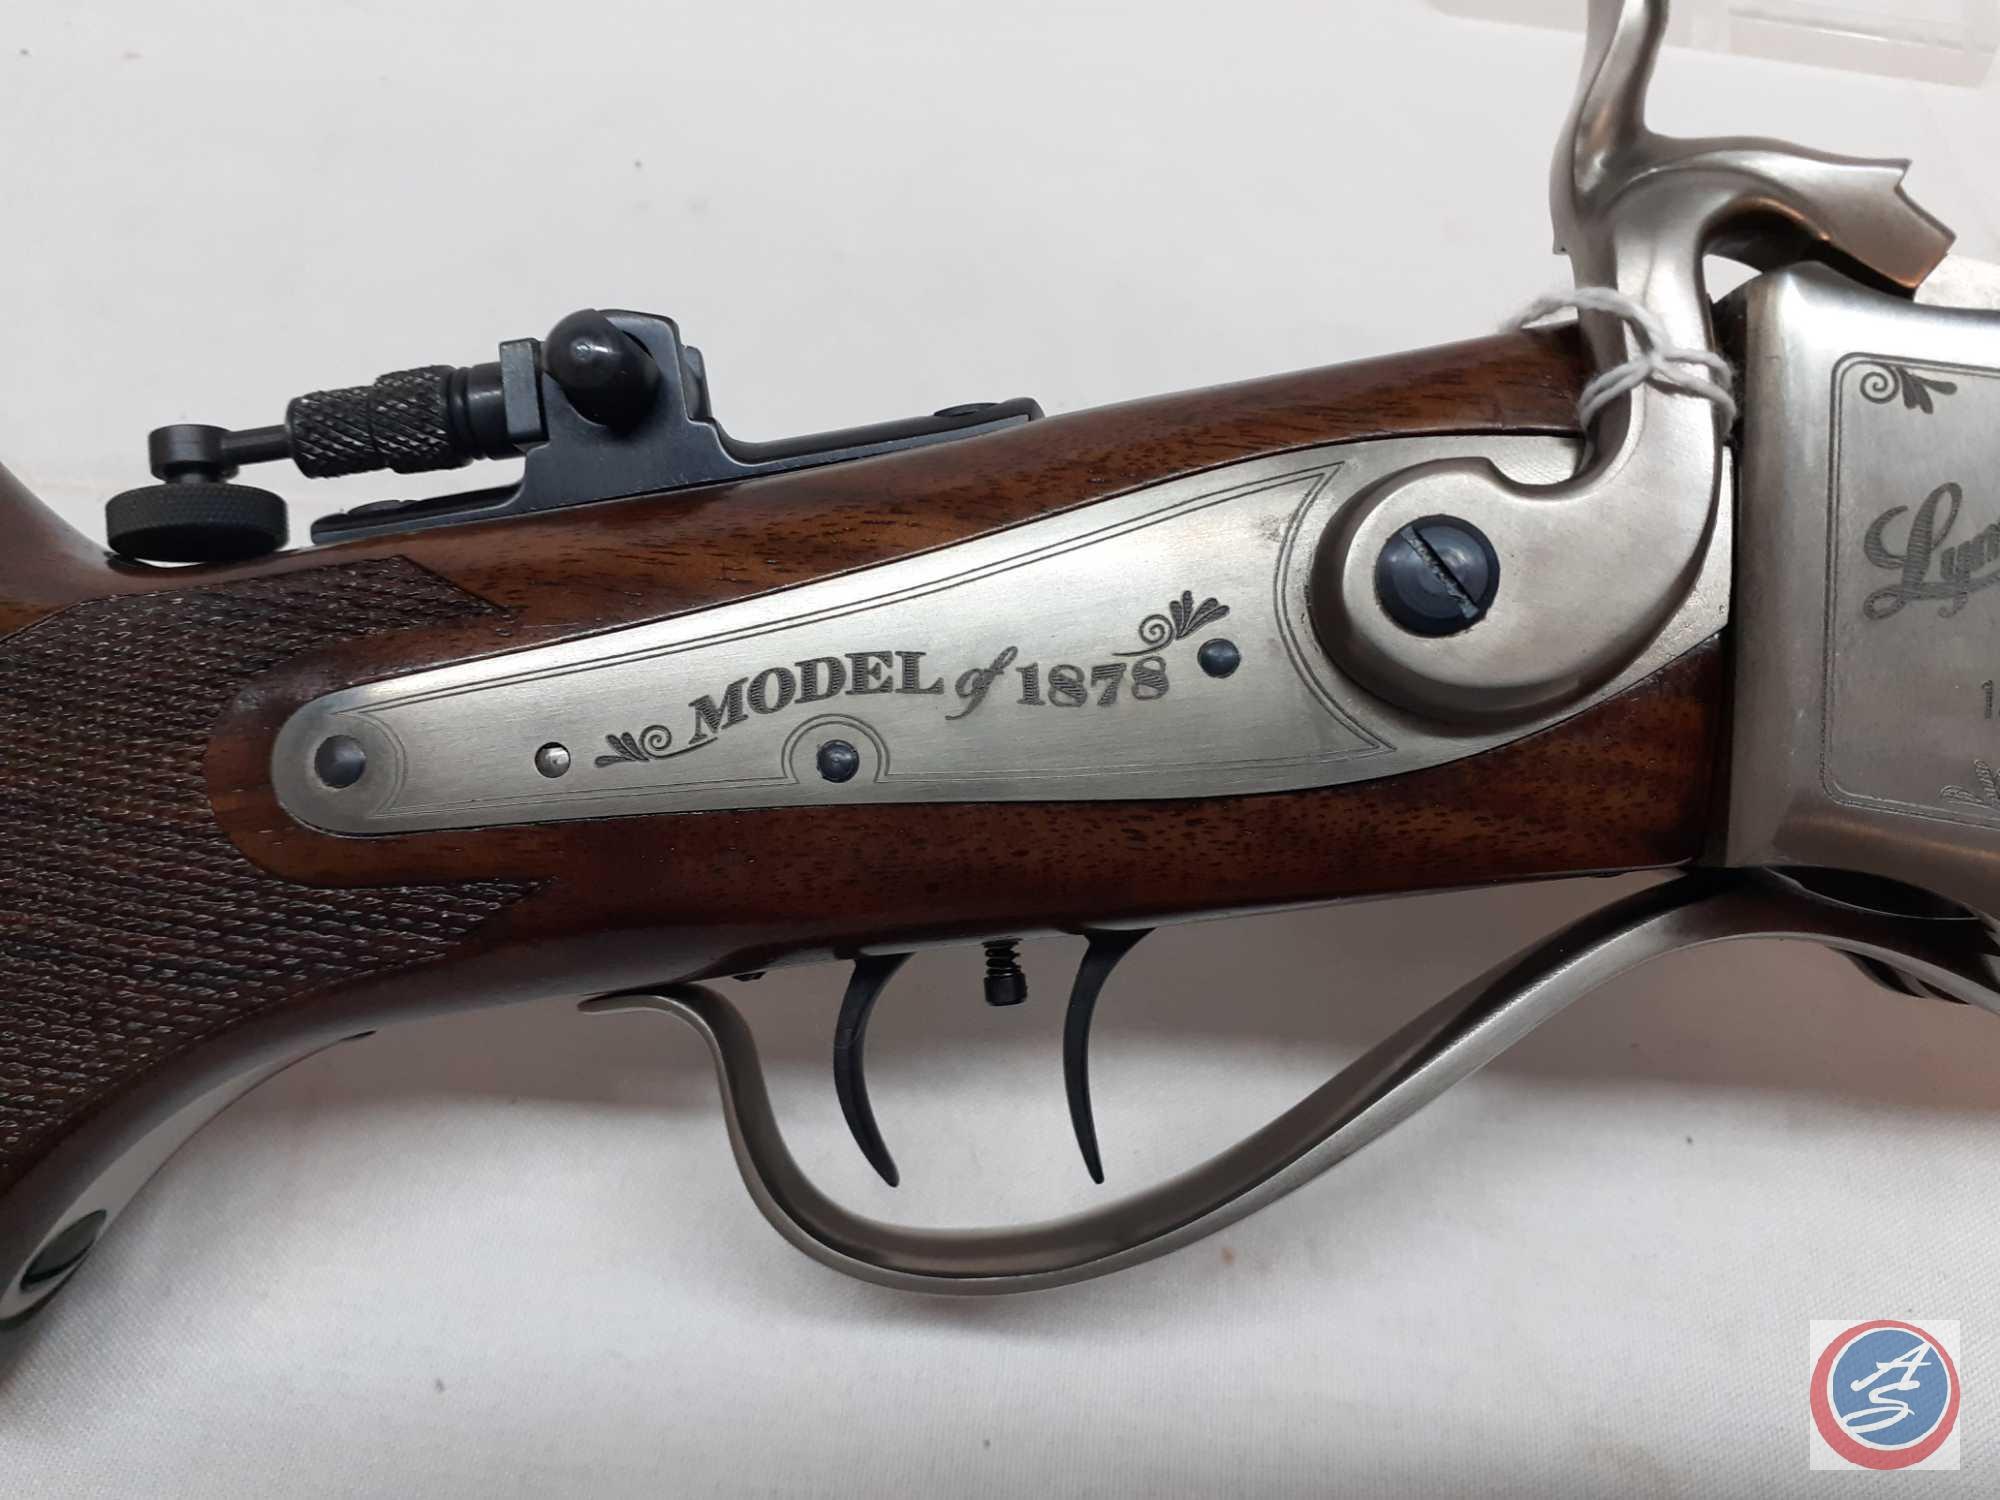 Lyman Model 1878 45/70 Rifle Reproduction Sharps 1878 Carbine with Satin Nickel Receiver, Set